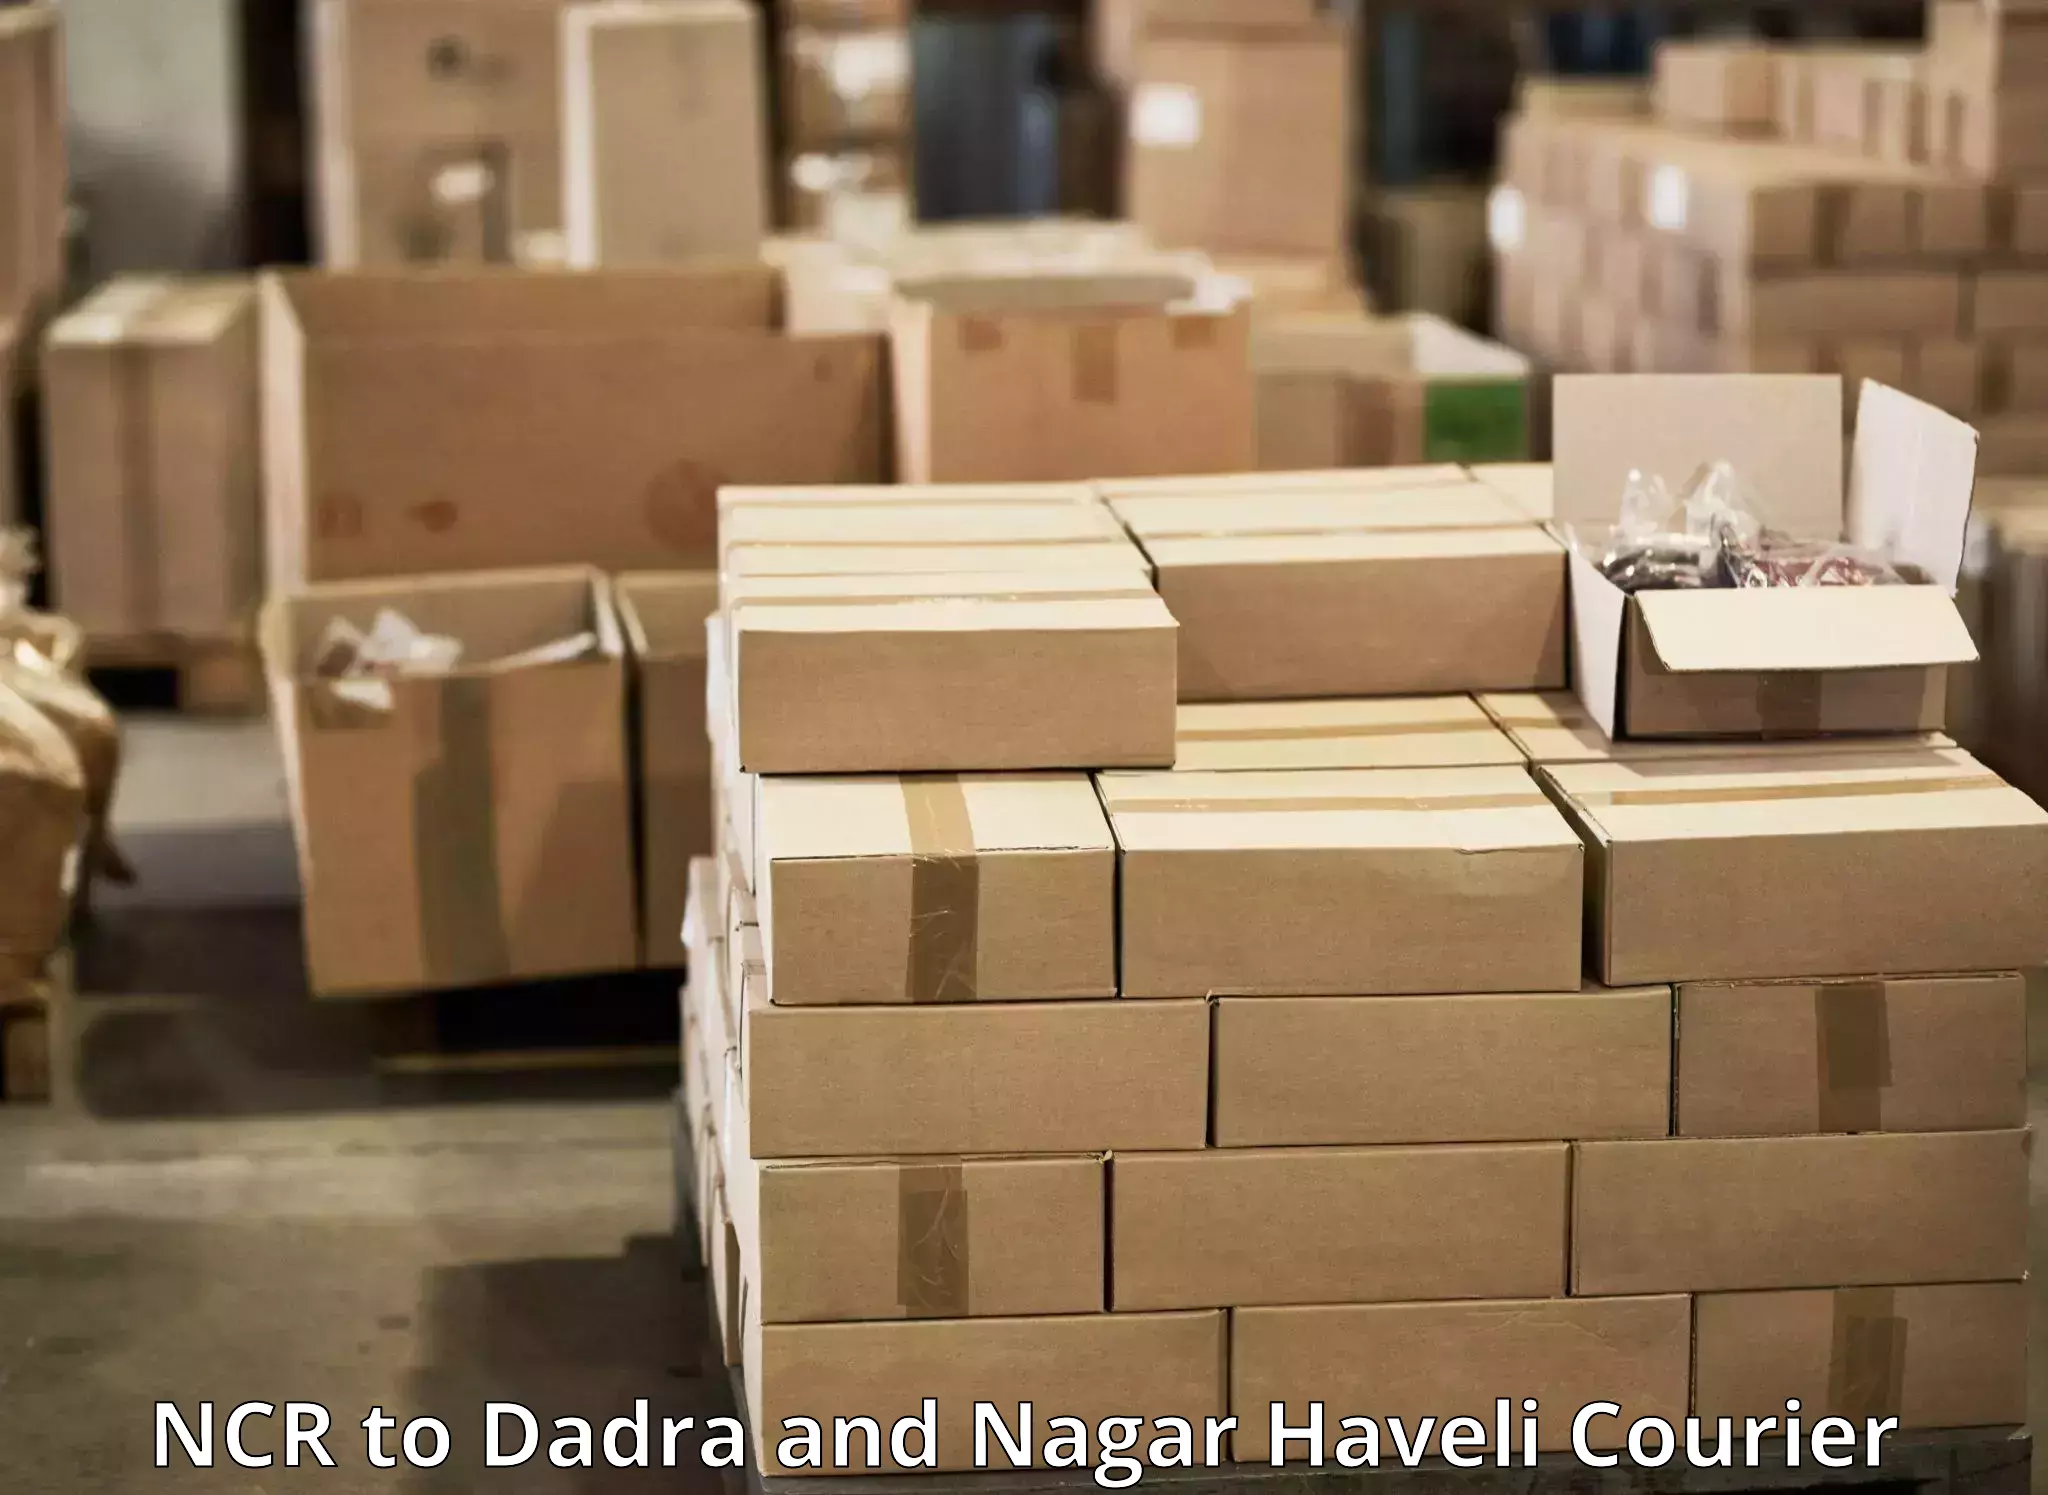 Personal courier services NCR to Silvassa